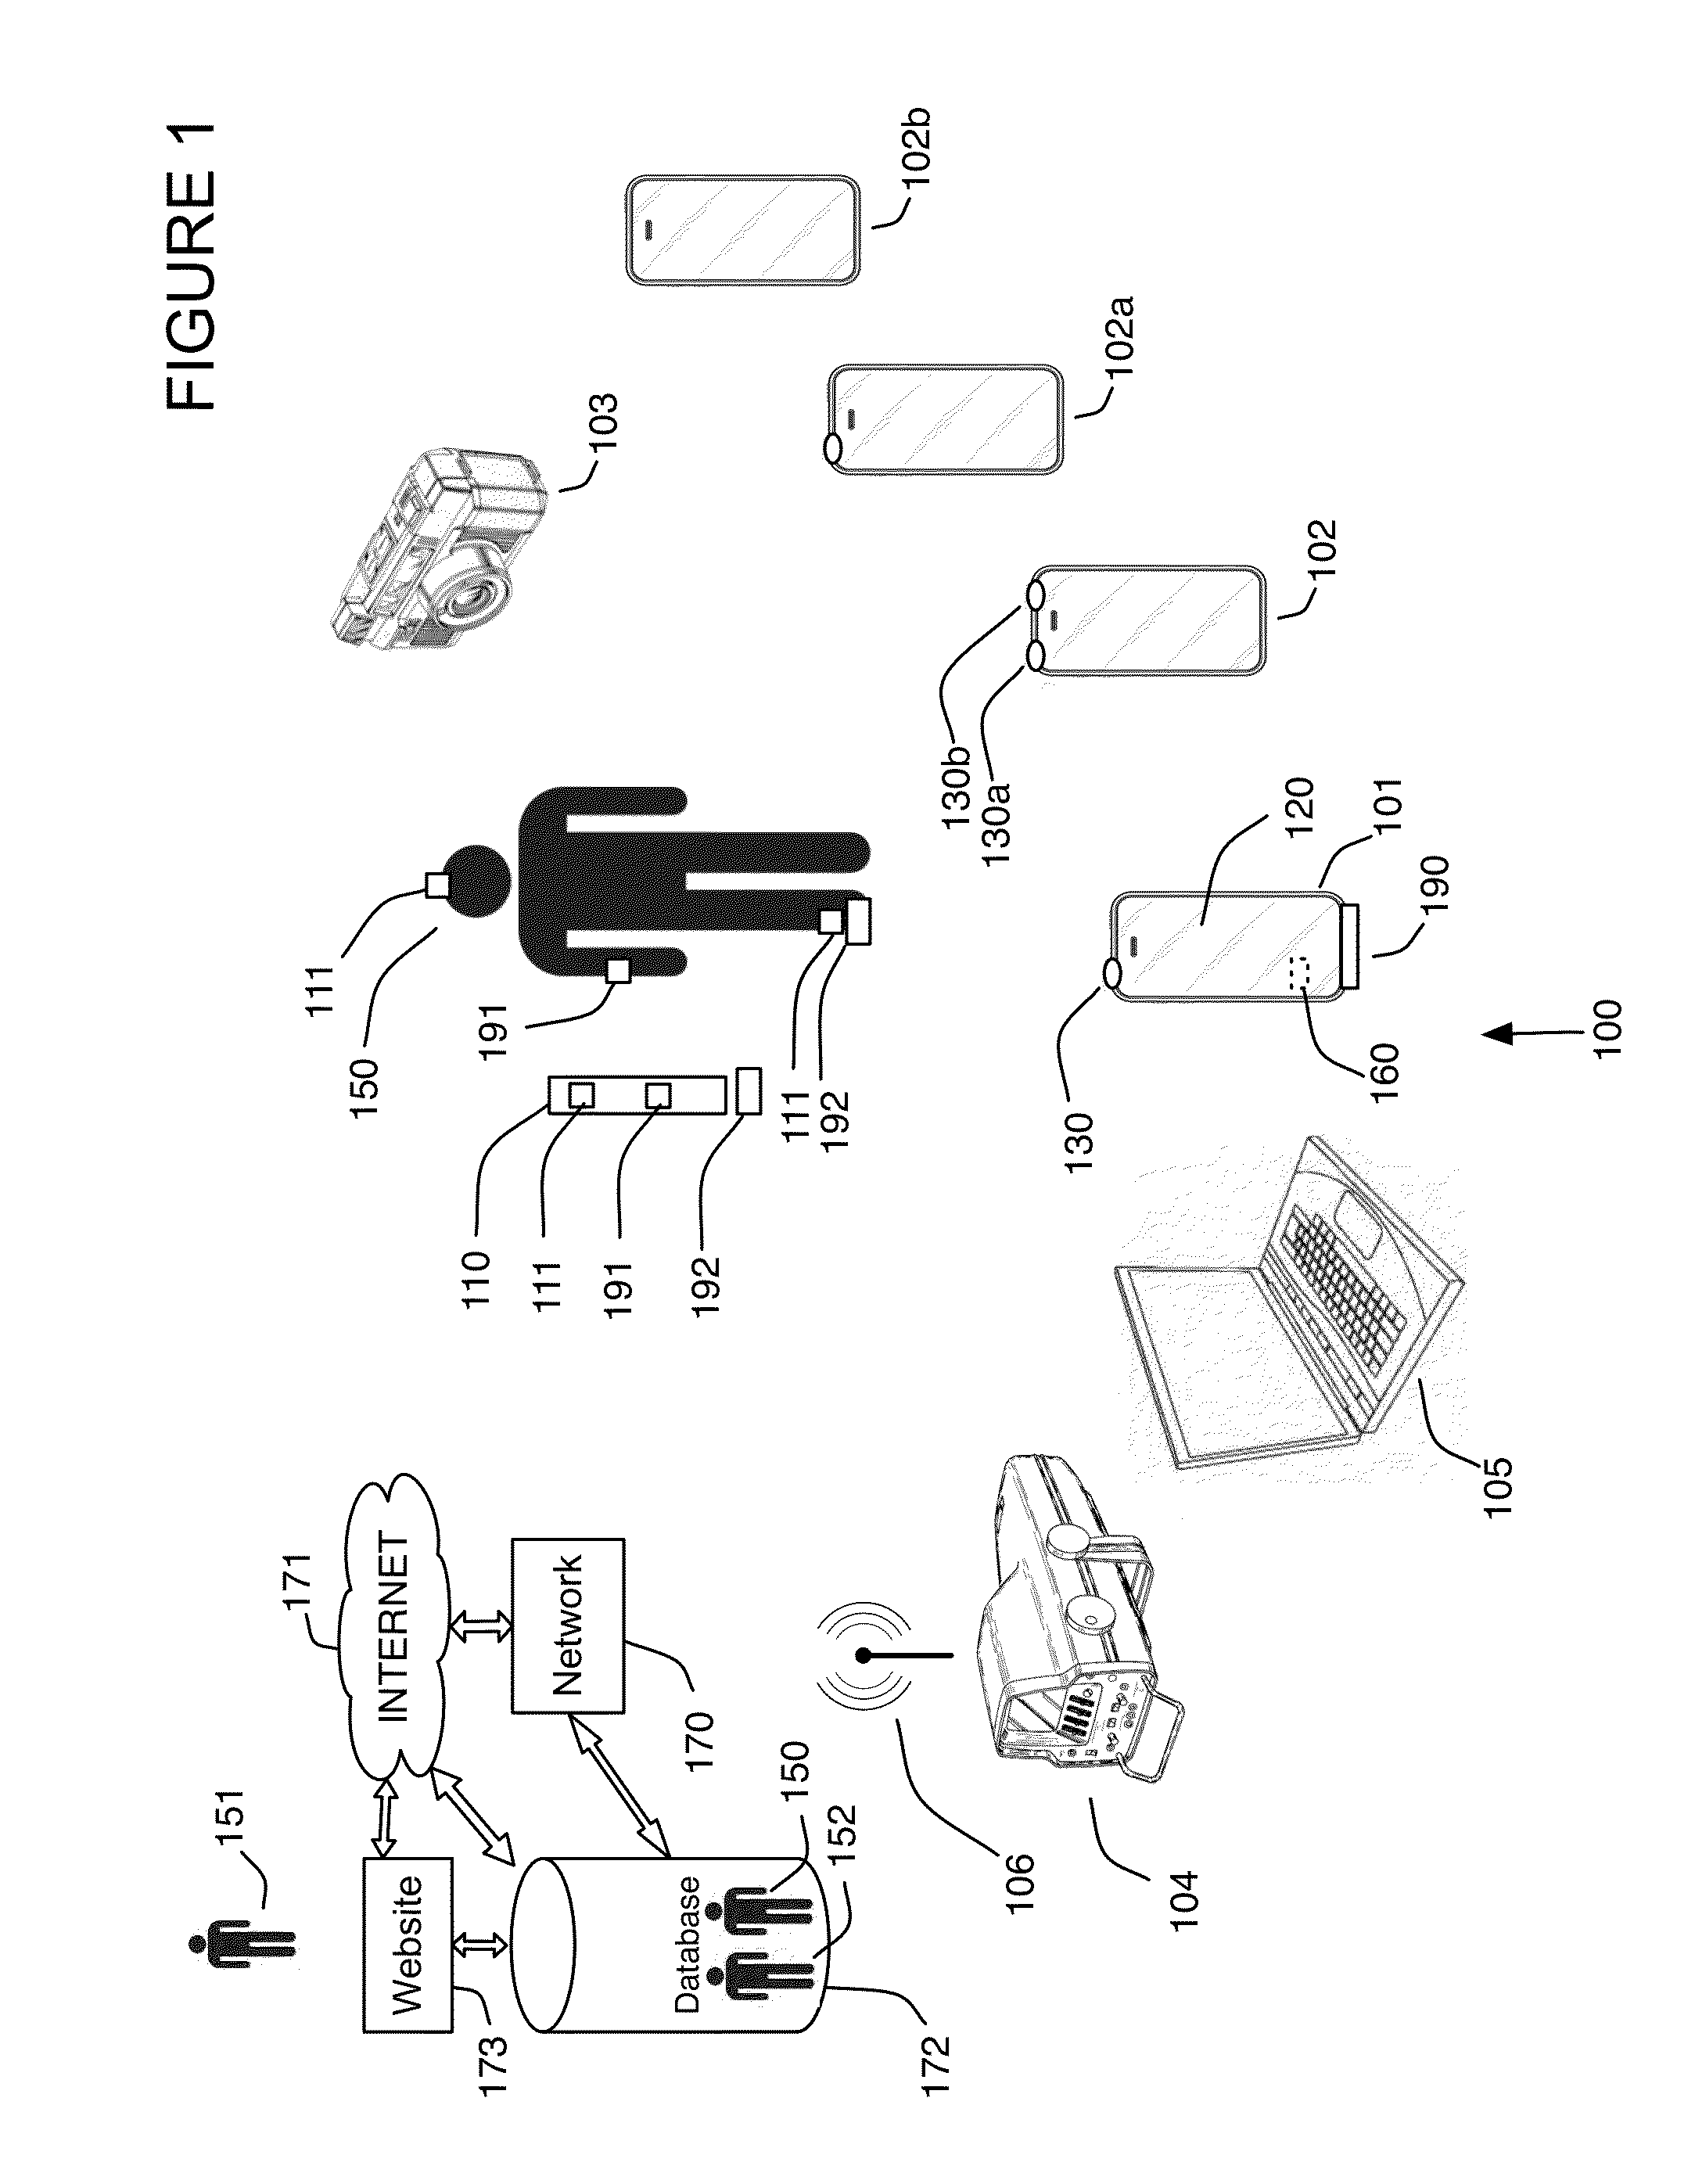 Motion event recognition system and method